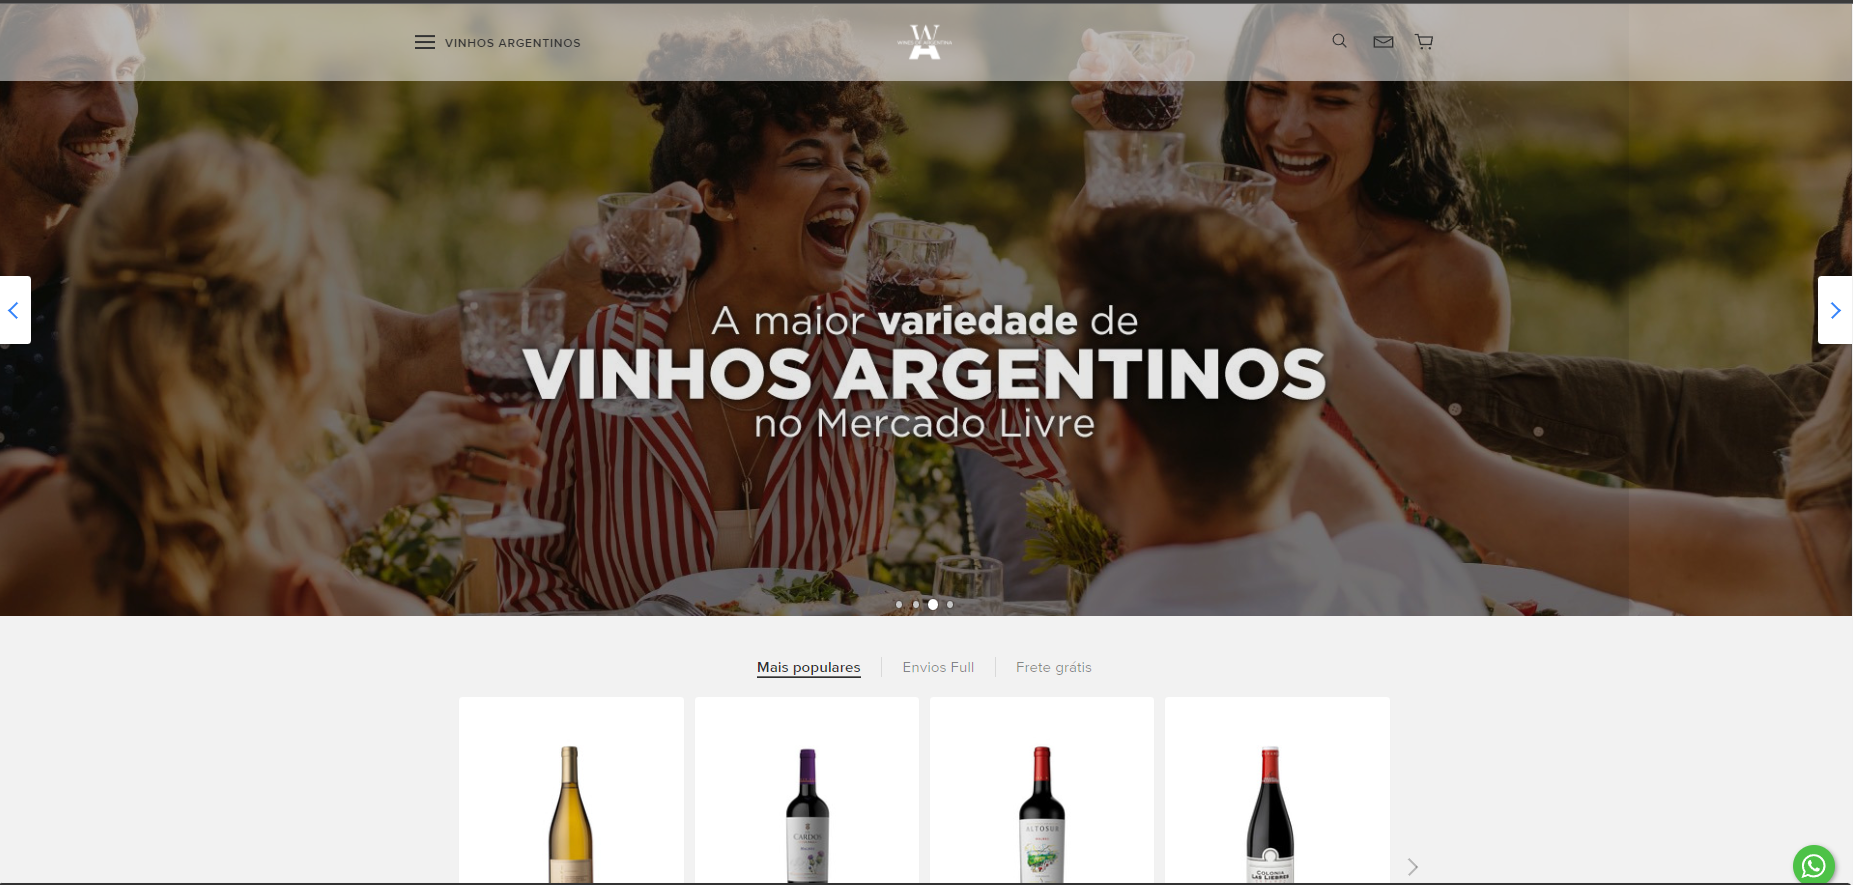 Argentine wine is a click away